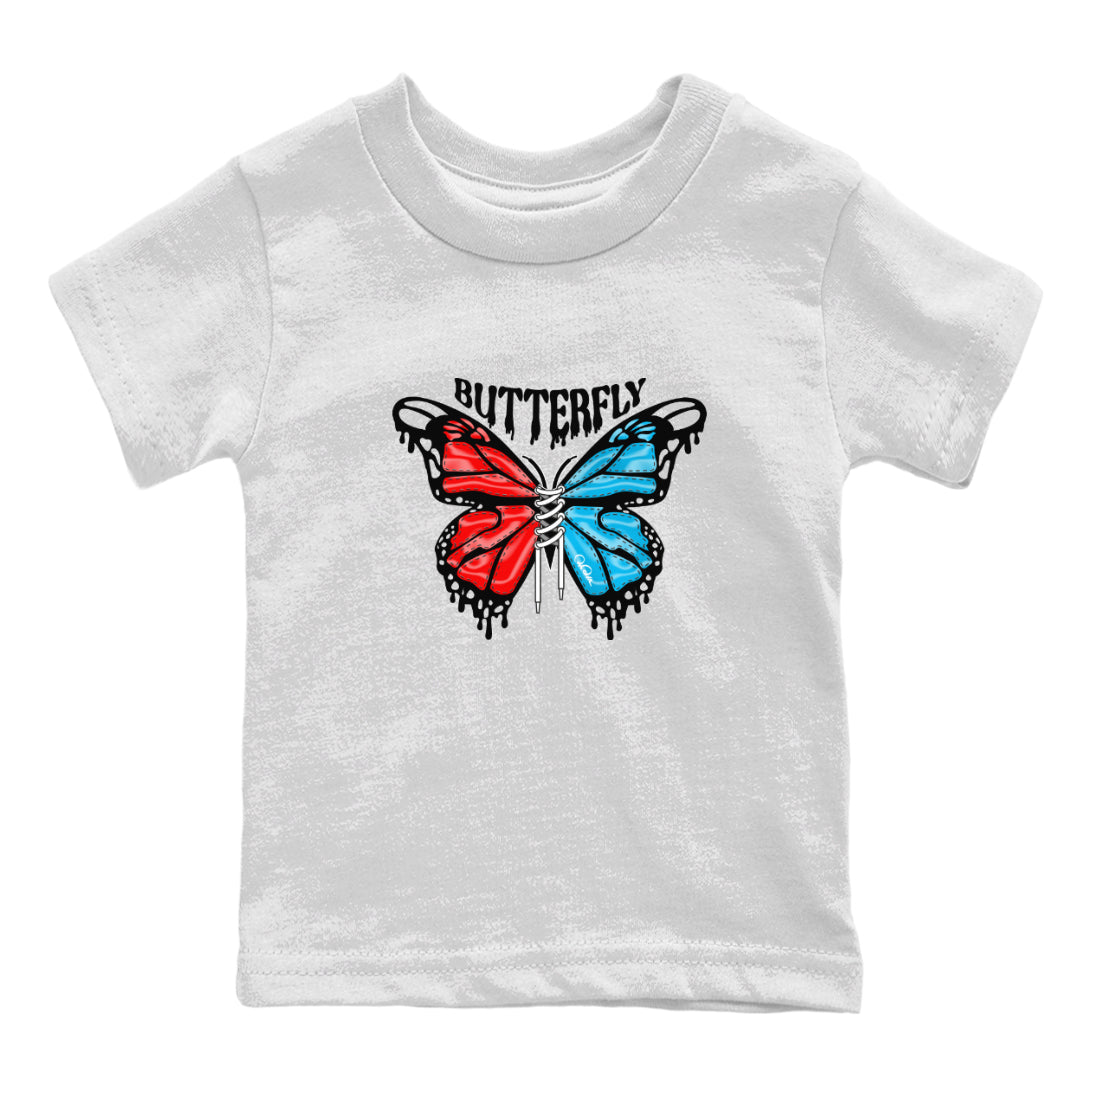 Air Jordan 1 UNC to Chicago Sneaker Match Tees Butterfly Streetwear Sneaker Shirt AJ1 UNC to Chicago Sneaker Release Tees Kids Shirts White 2